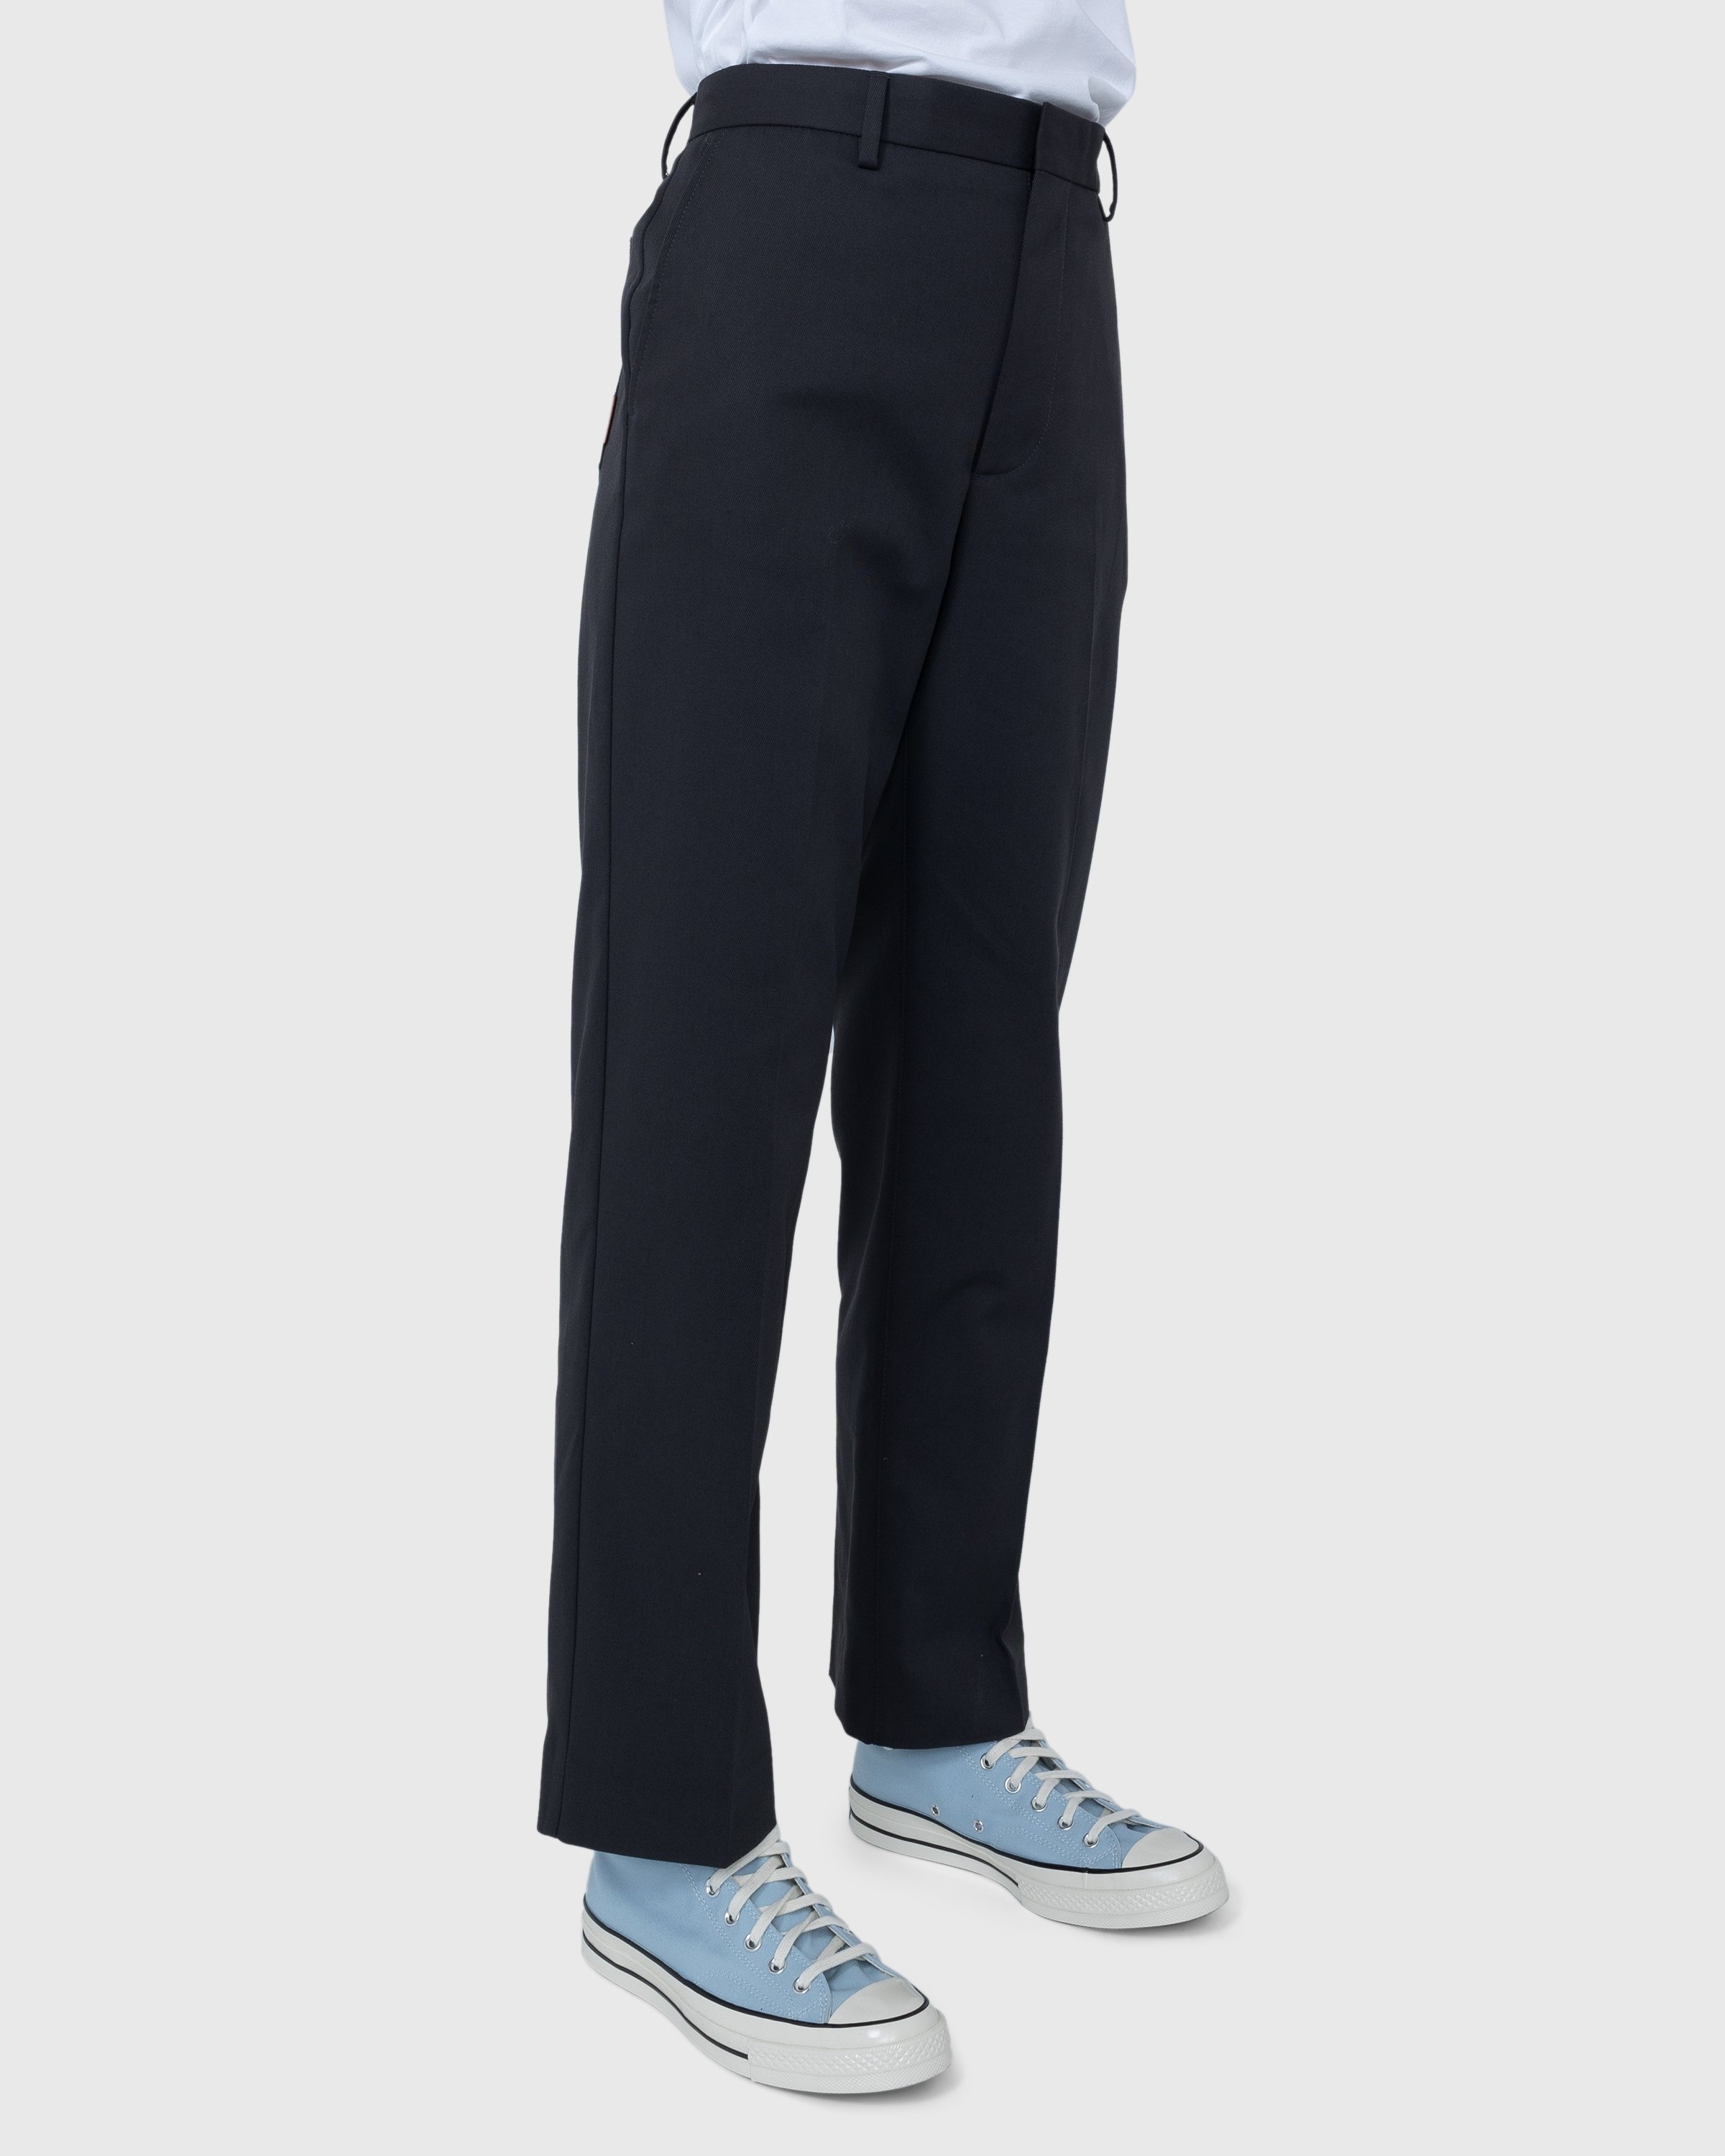 Acne Studios – Casual Trousers Anthracite Grey - Pants - Grey - Image 3